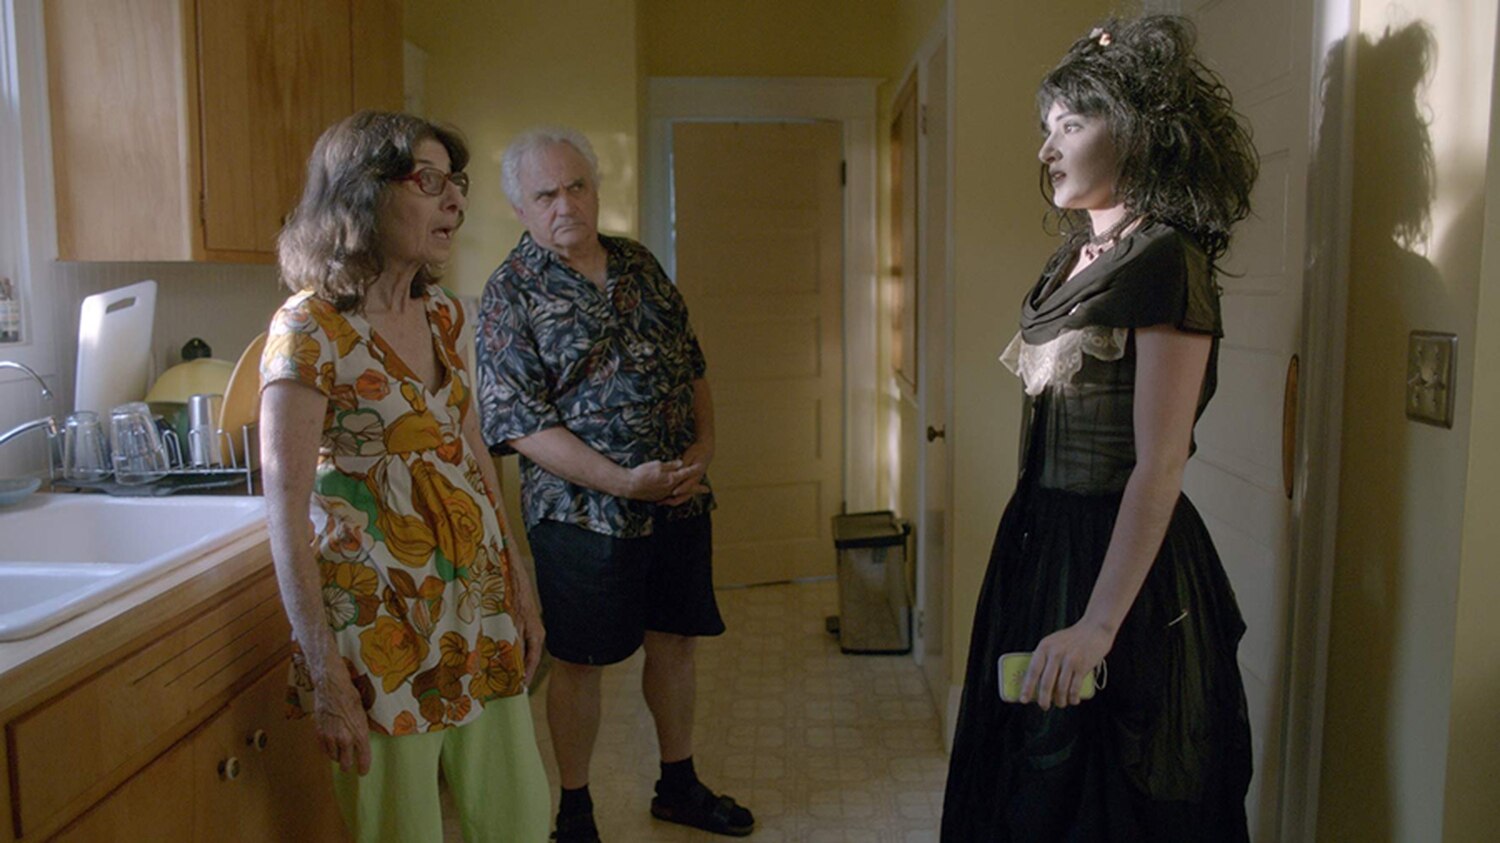 Joey and her parent's have a confrontation in their kitchen. Joey is wearing her goth outfit.